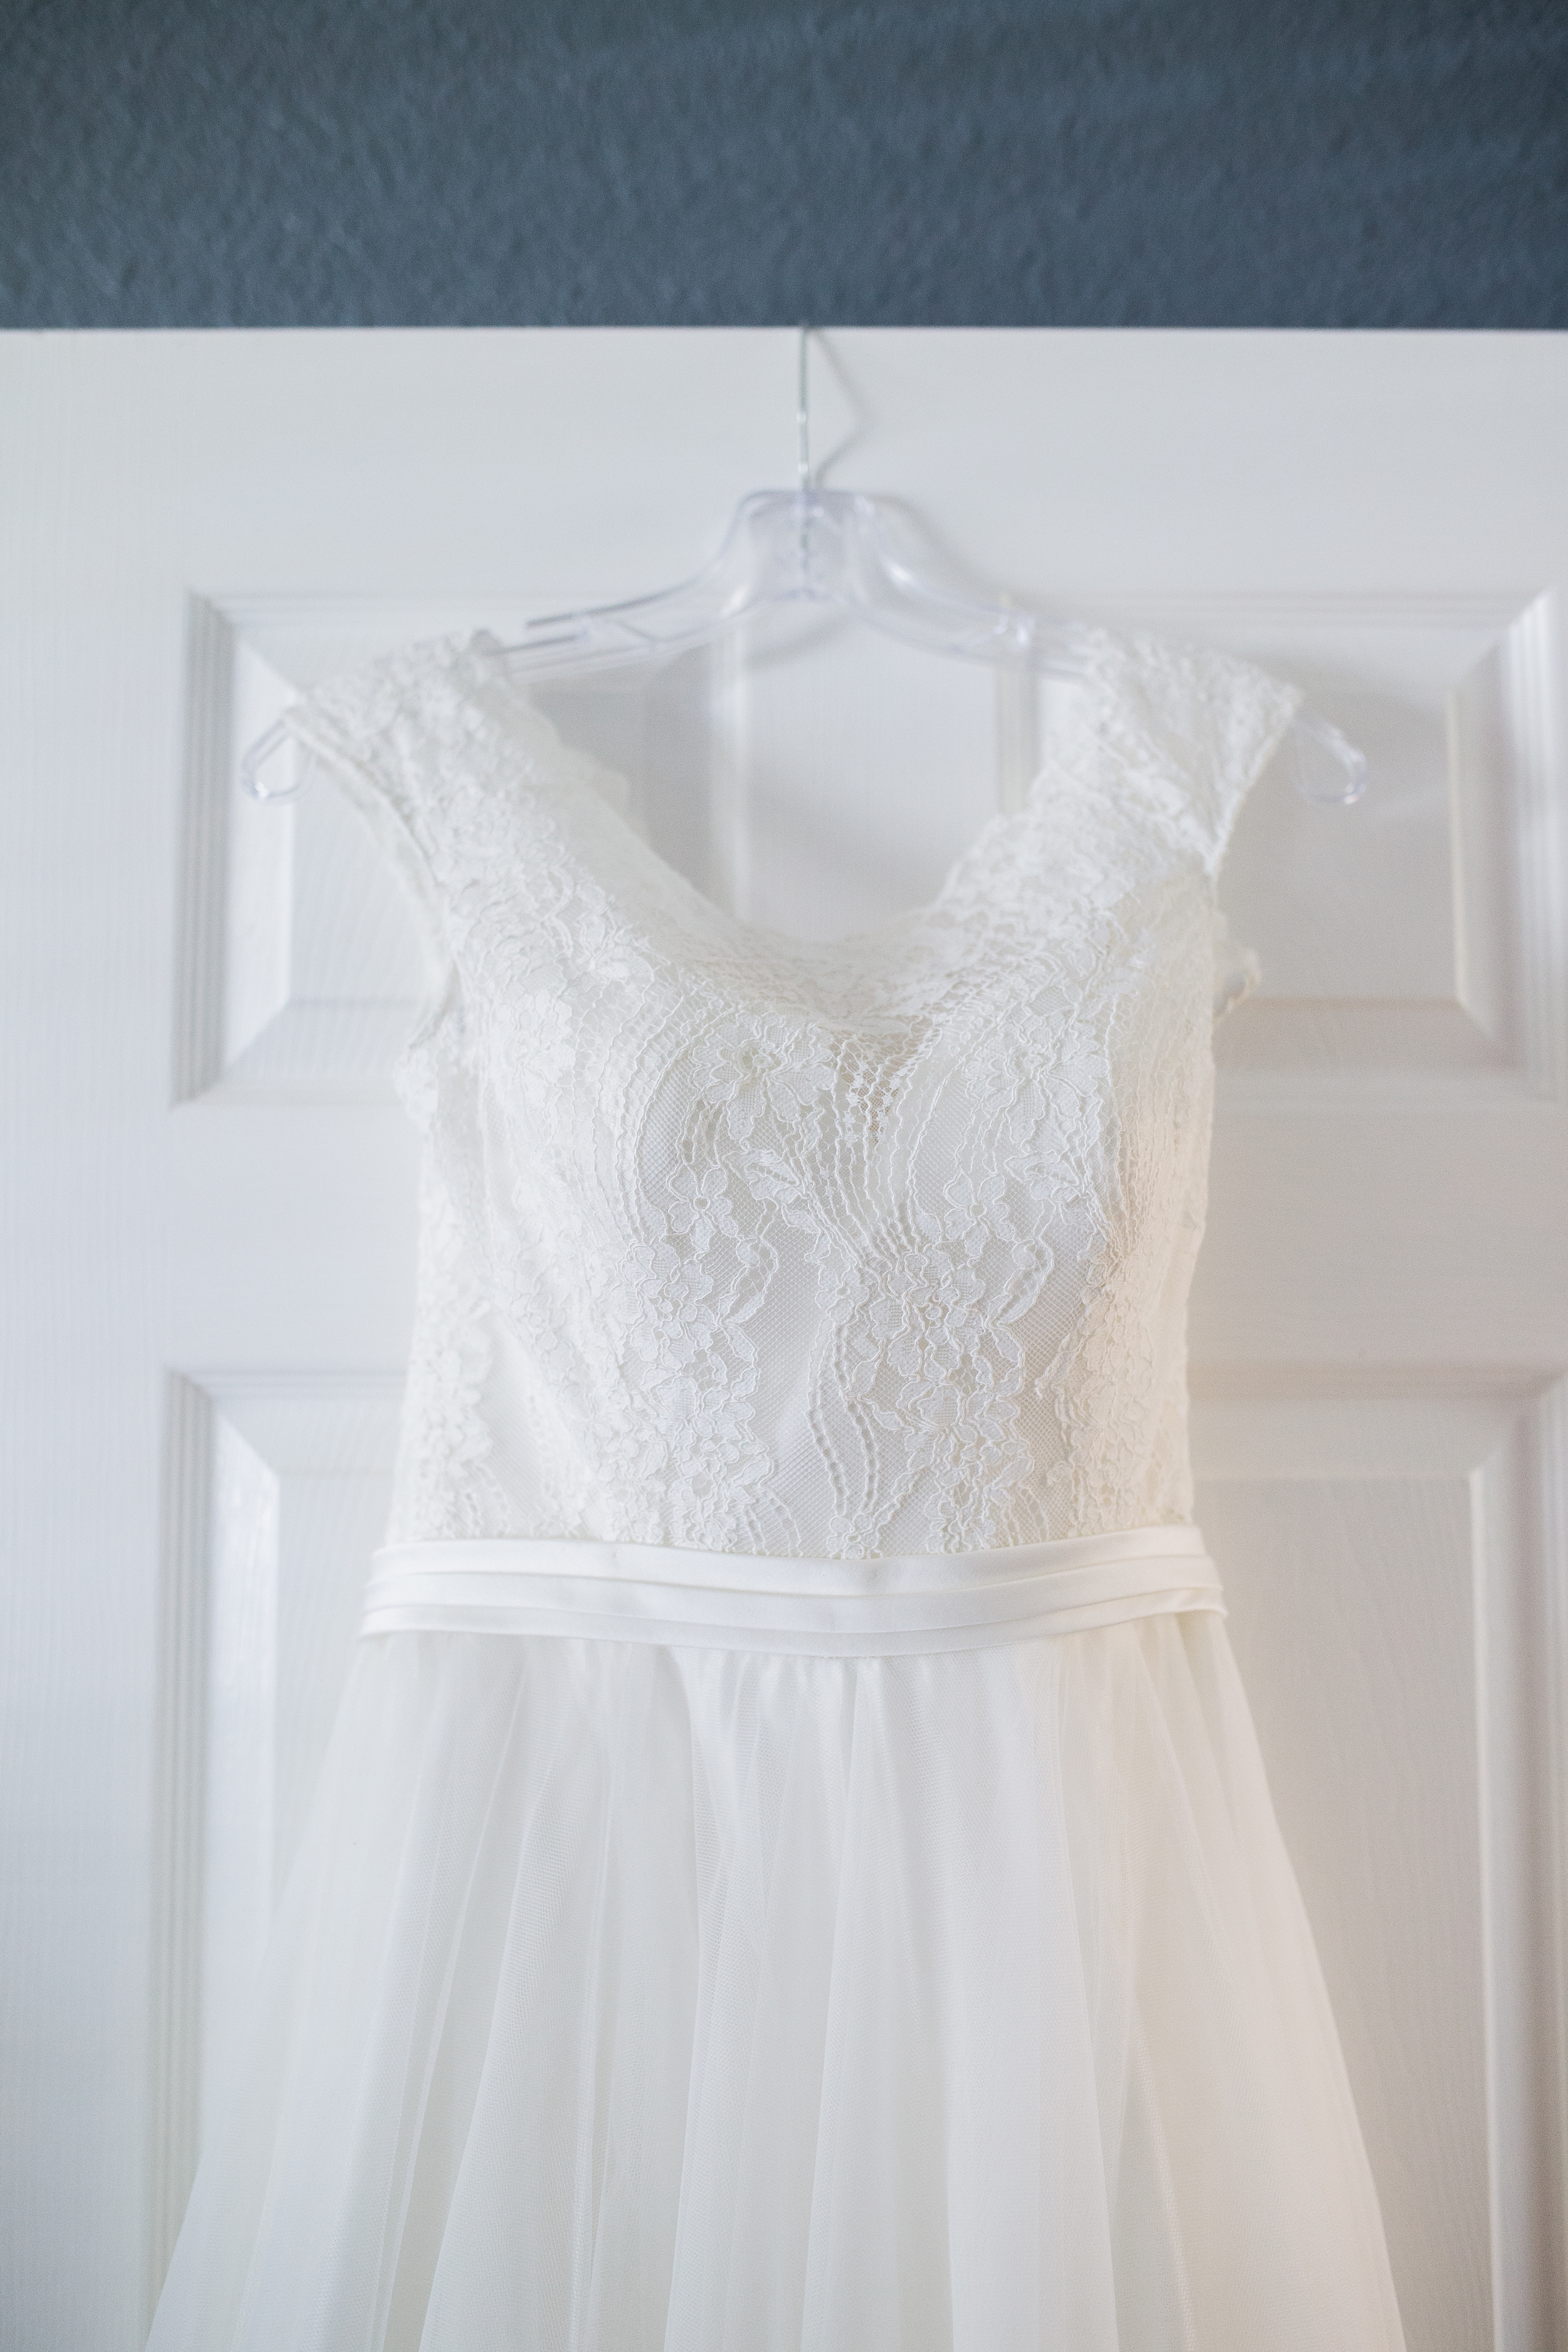 Lace wedding gown - Coohills Wedding